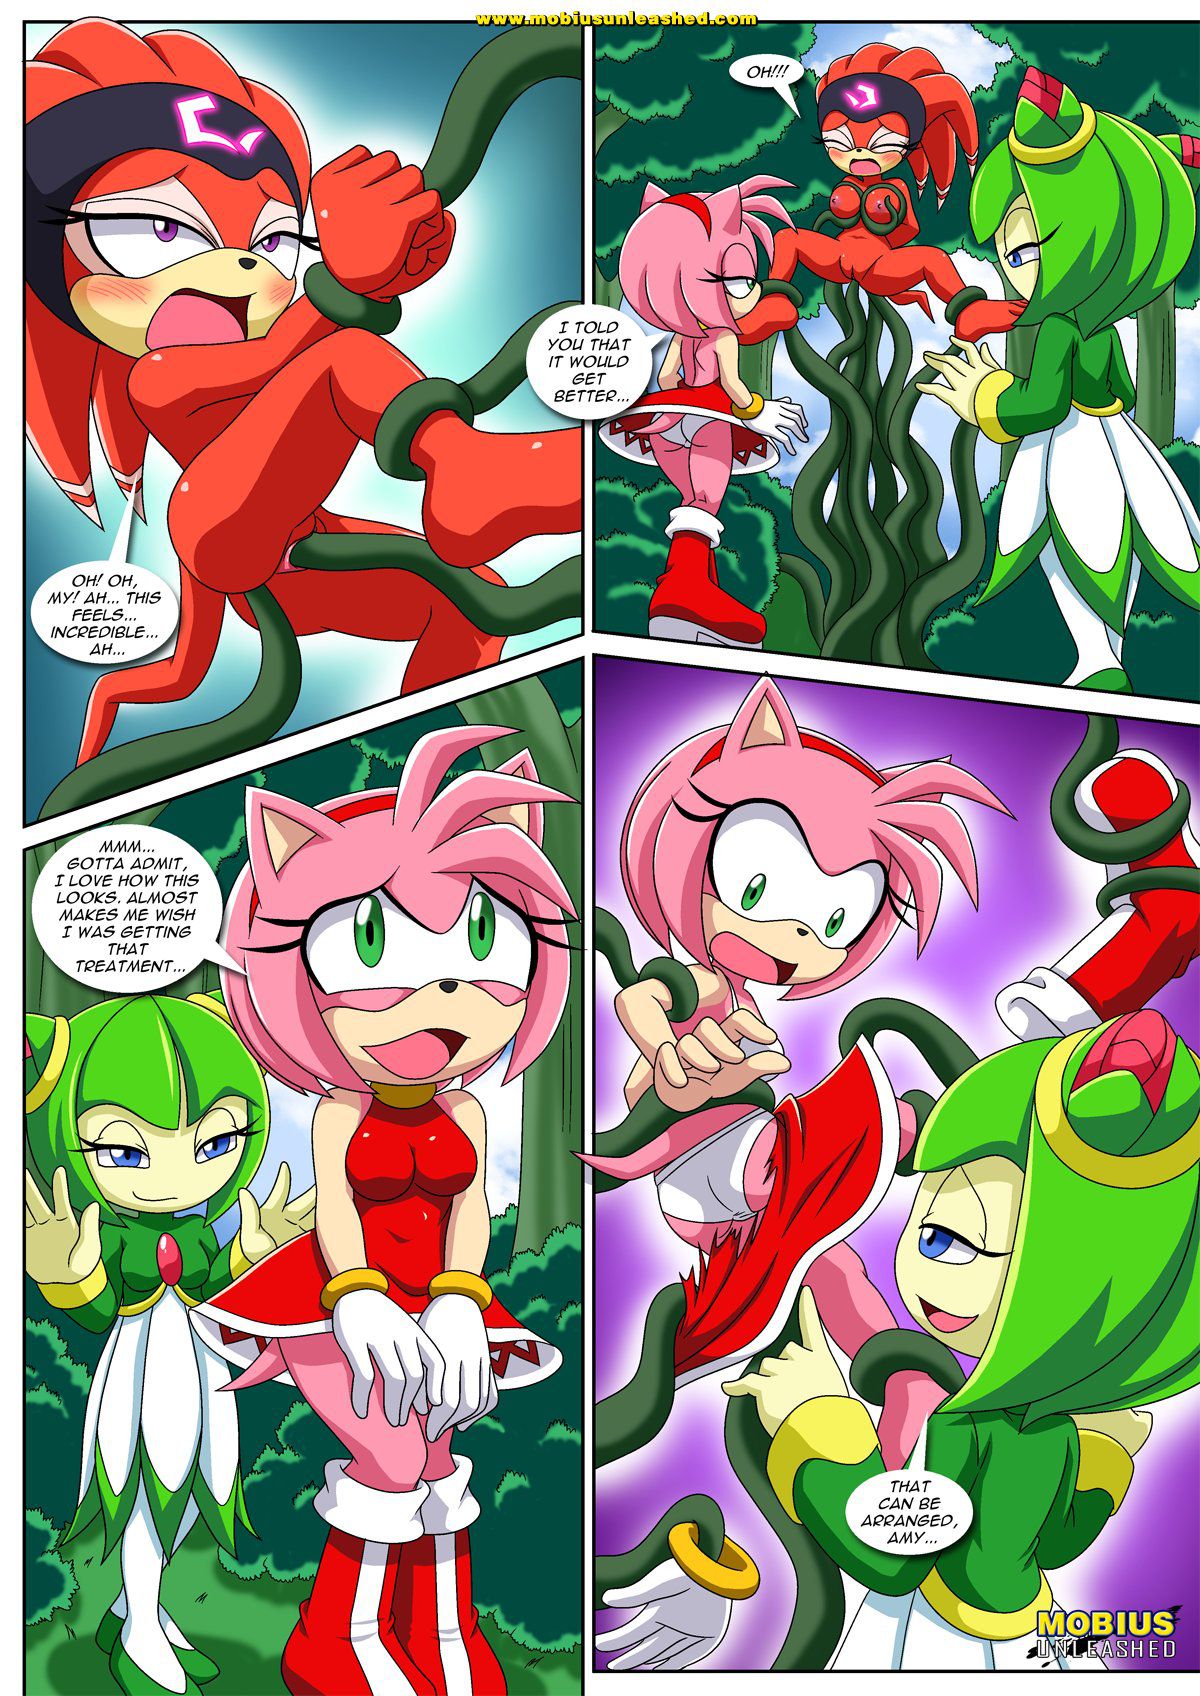 [Palcomix] Team GF's Tentacled Tale (Sonic The Hedgehog) [Ongoing] 11